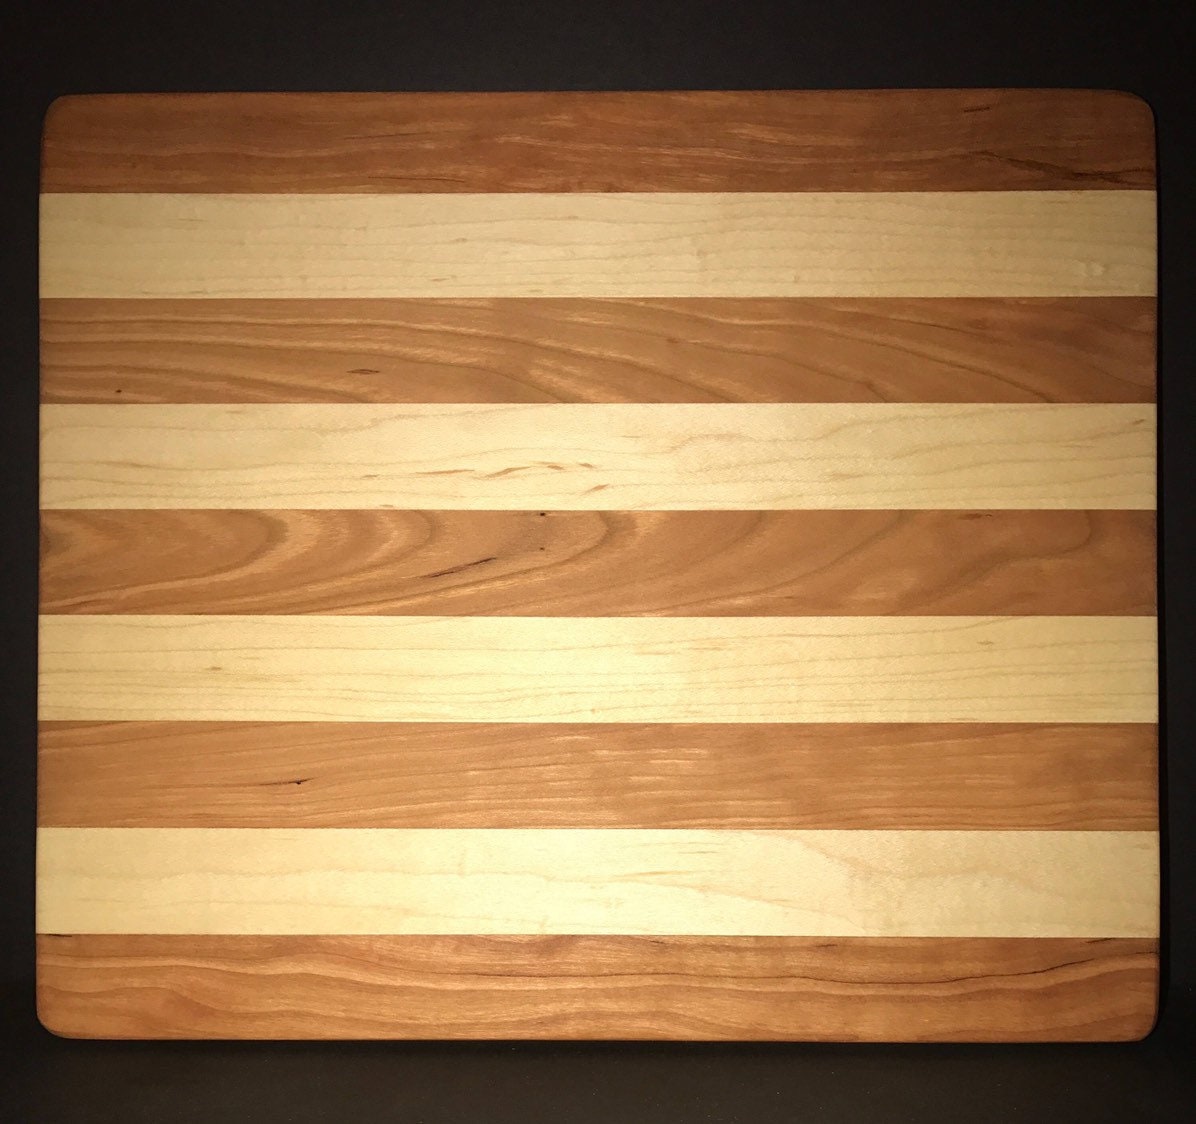 Pan Am 1945 Logo 8”X10” Cutting boards Made Out Of Cherry and Maple (12”X14” & 13”X18” Also Available)